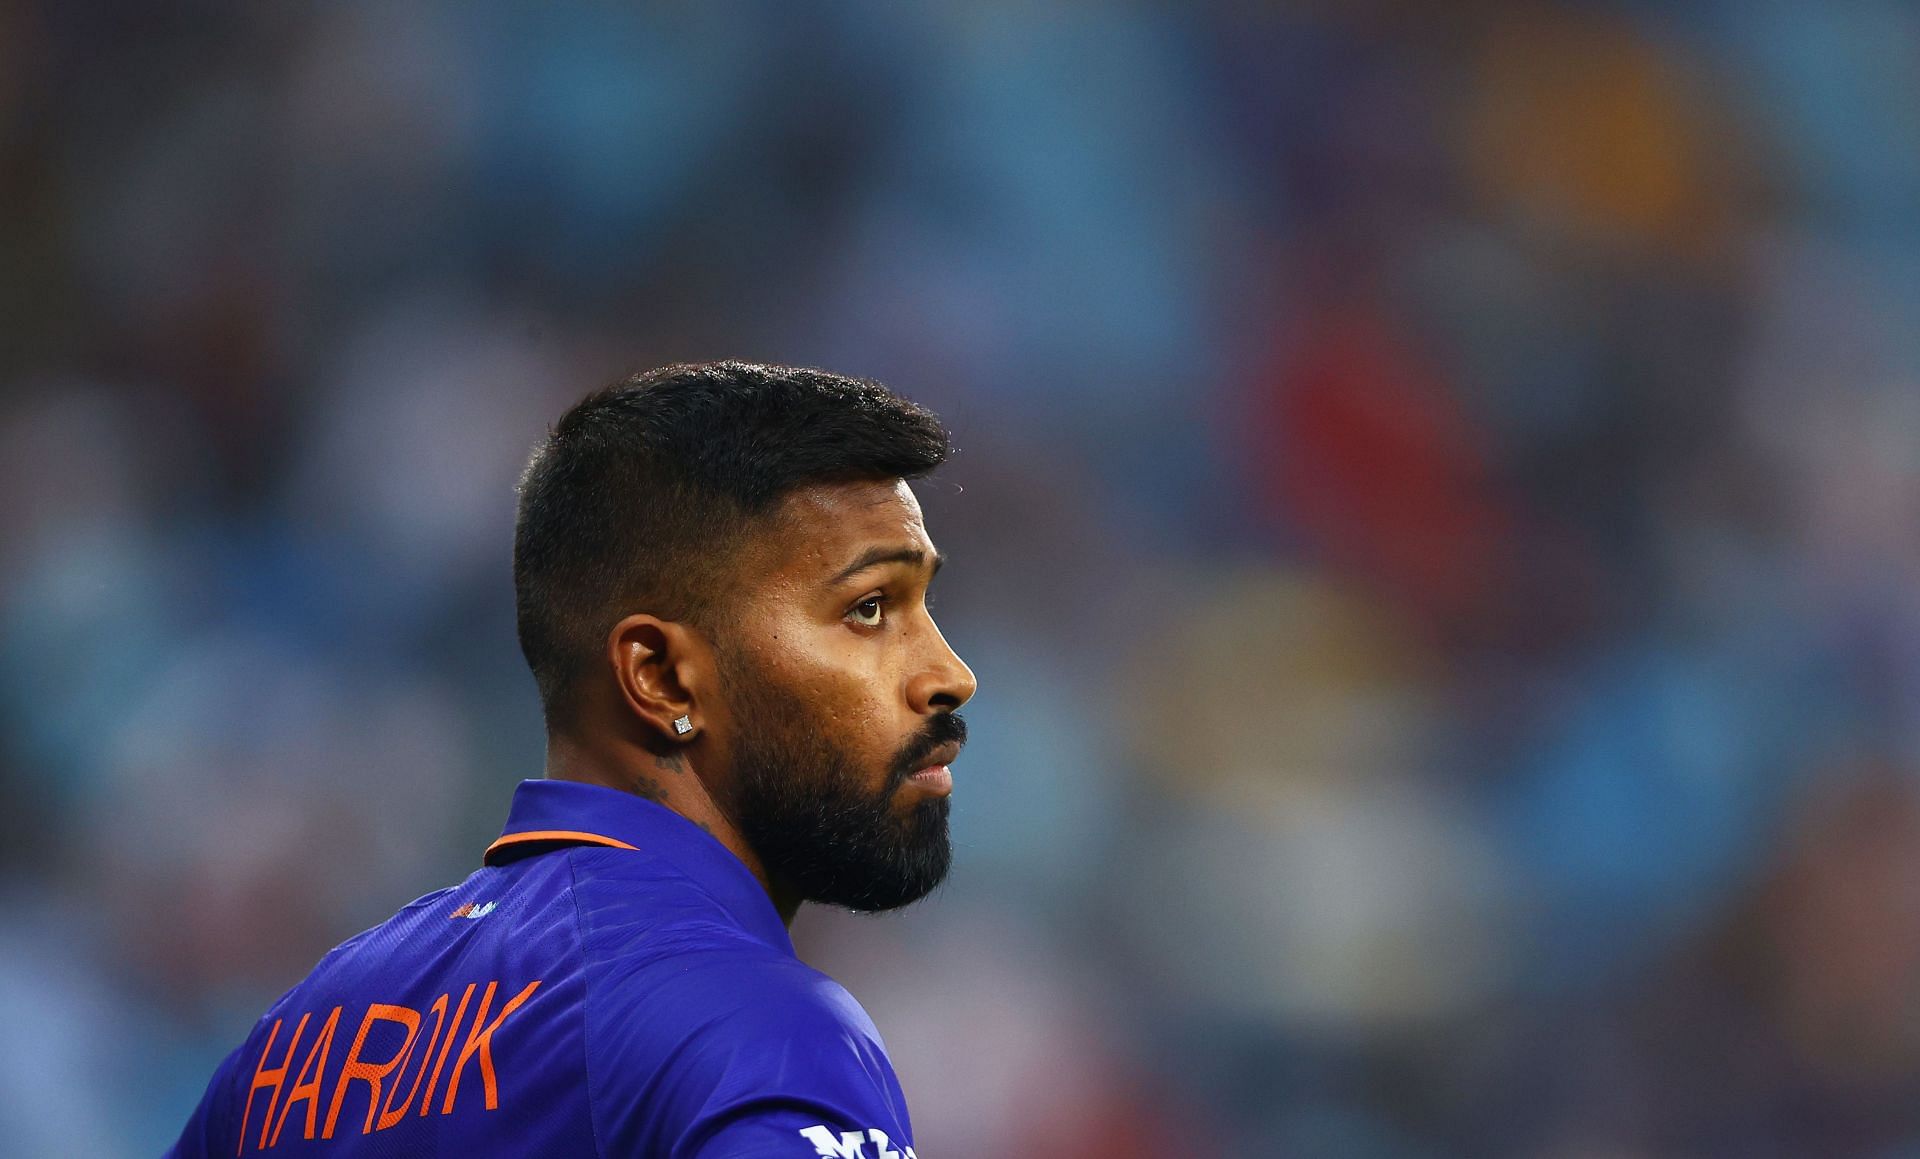 Hardik Pandya recently led Gujarat Titans to IPL 2022 title in their maiden season (Credit: Getty Images)